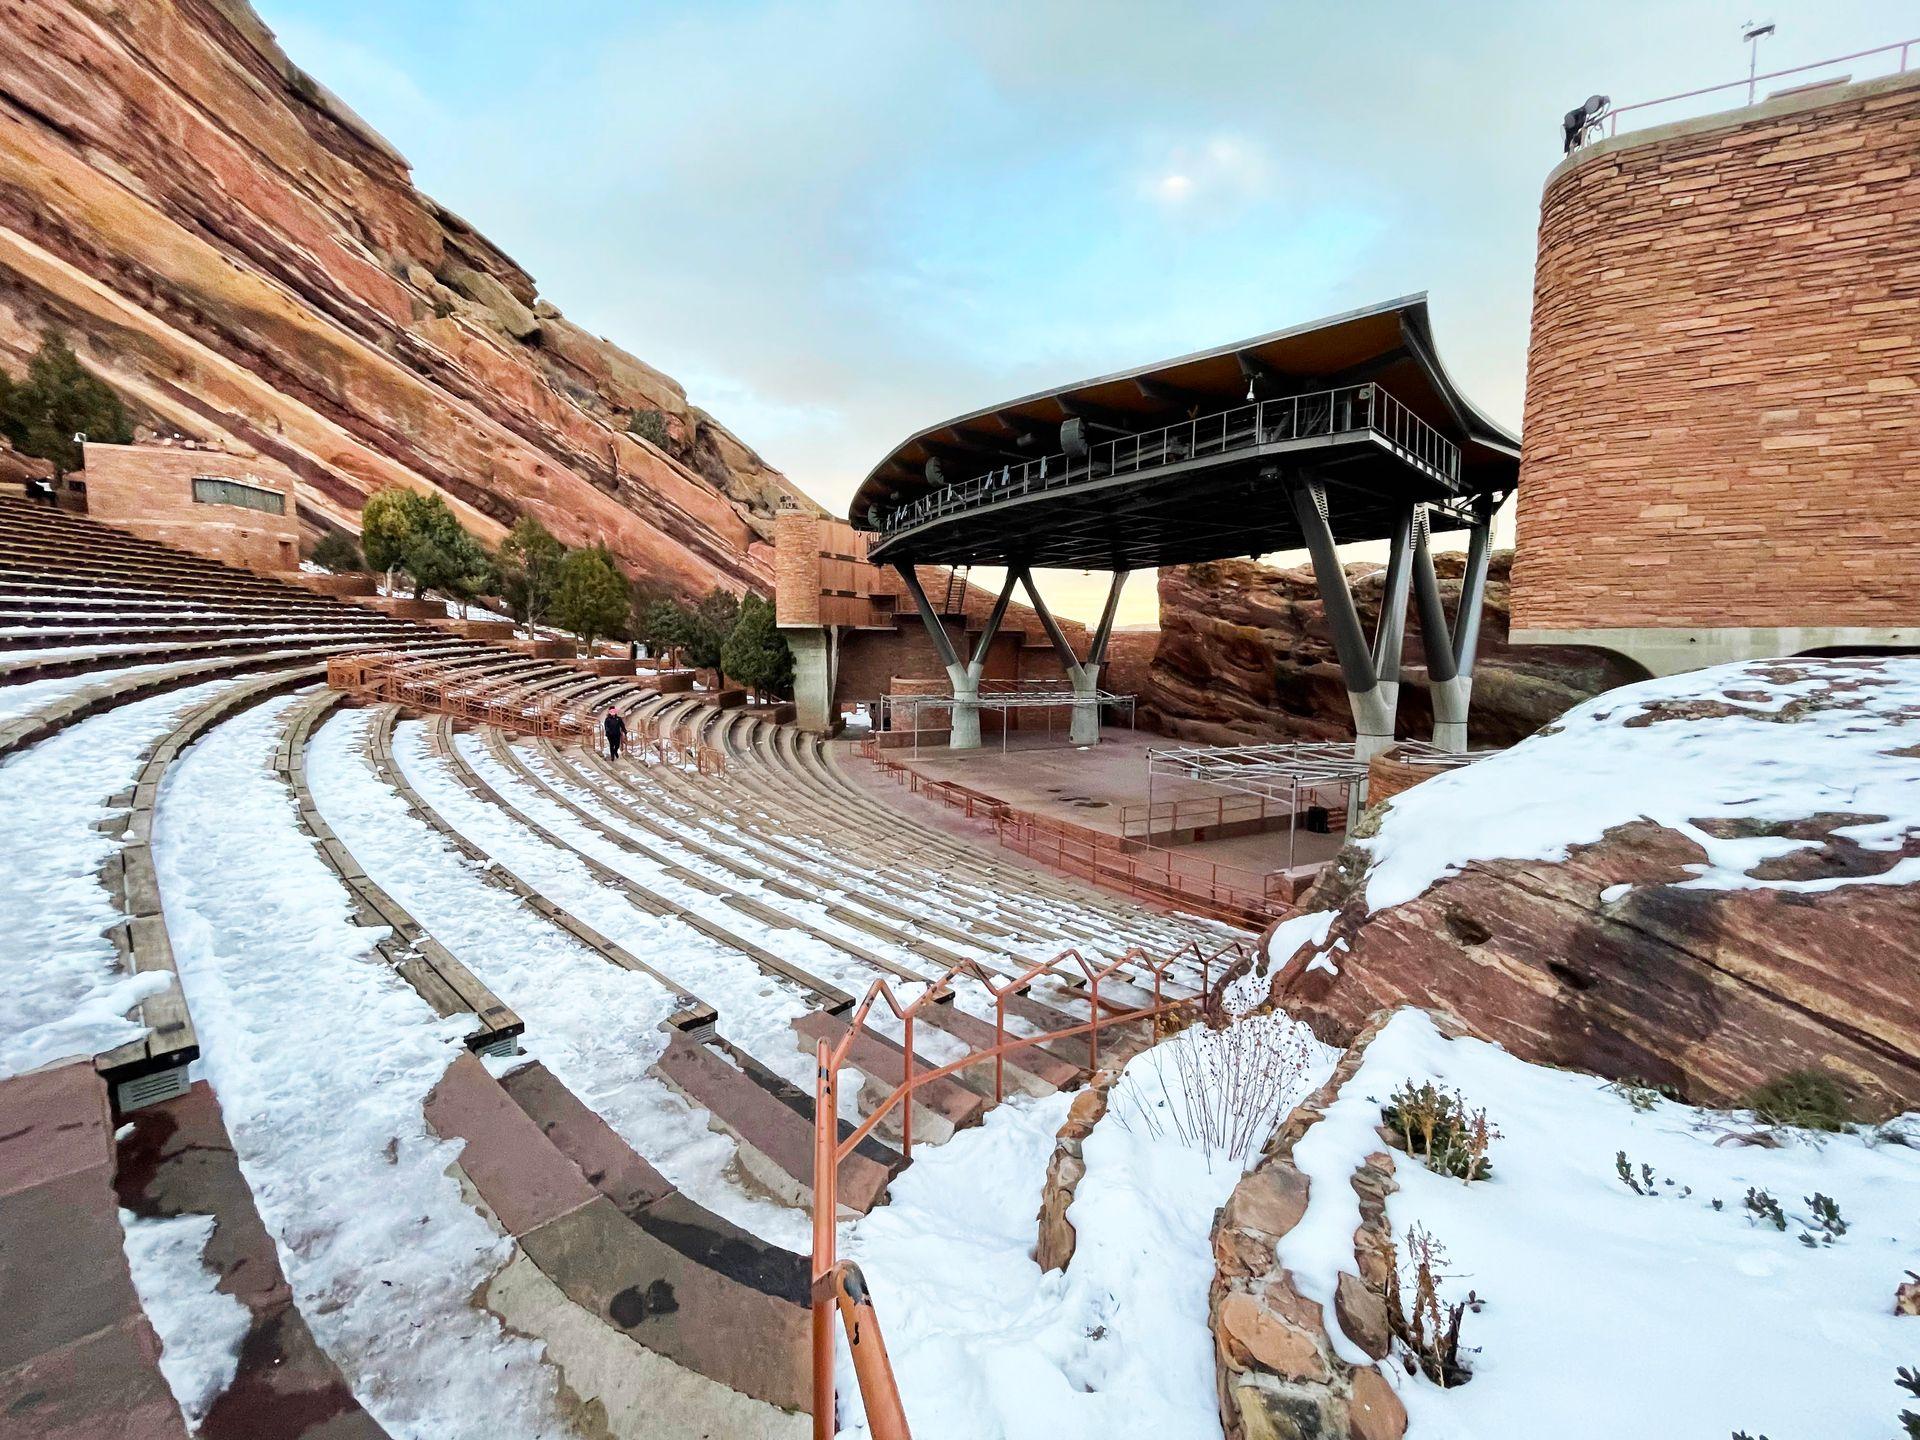 Red Rock Ampitheatre covered in snow. Snow is one the bleachers and the stage is surrounded by huge orange rocks.